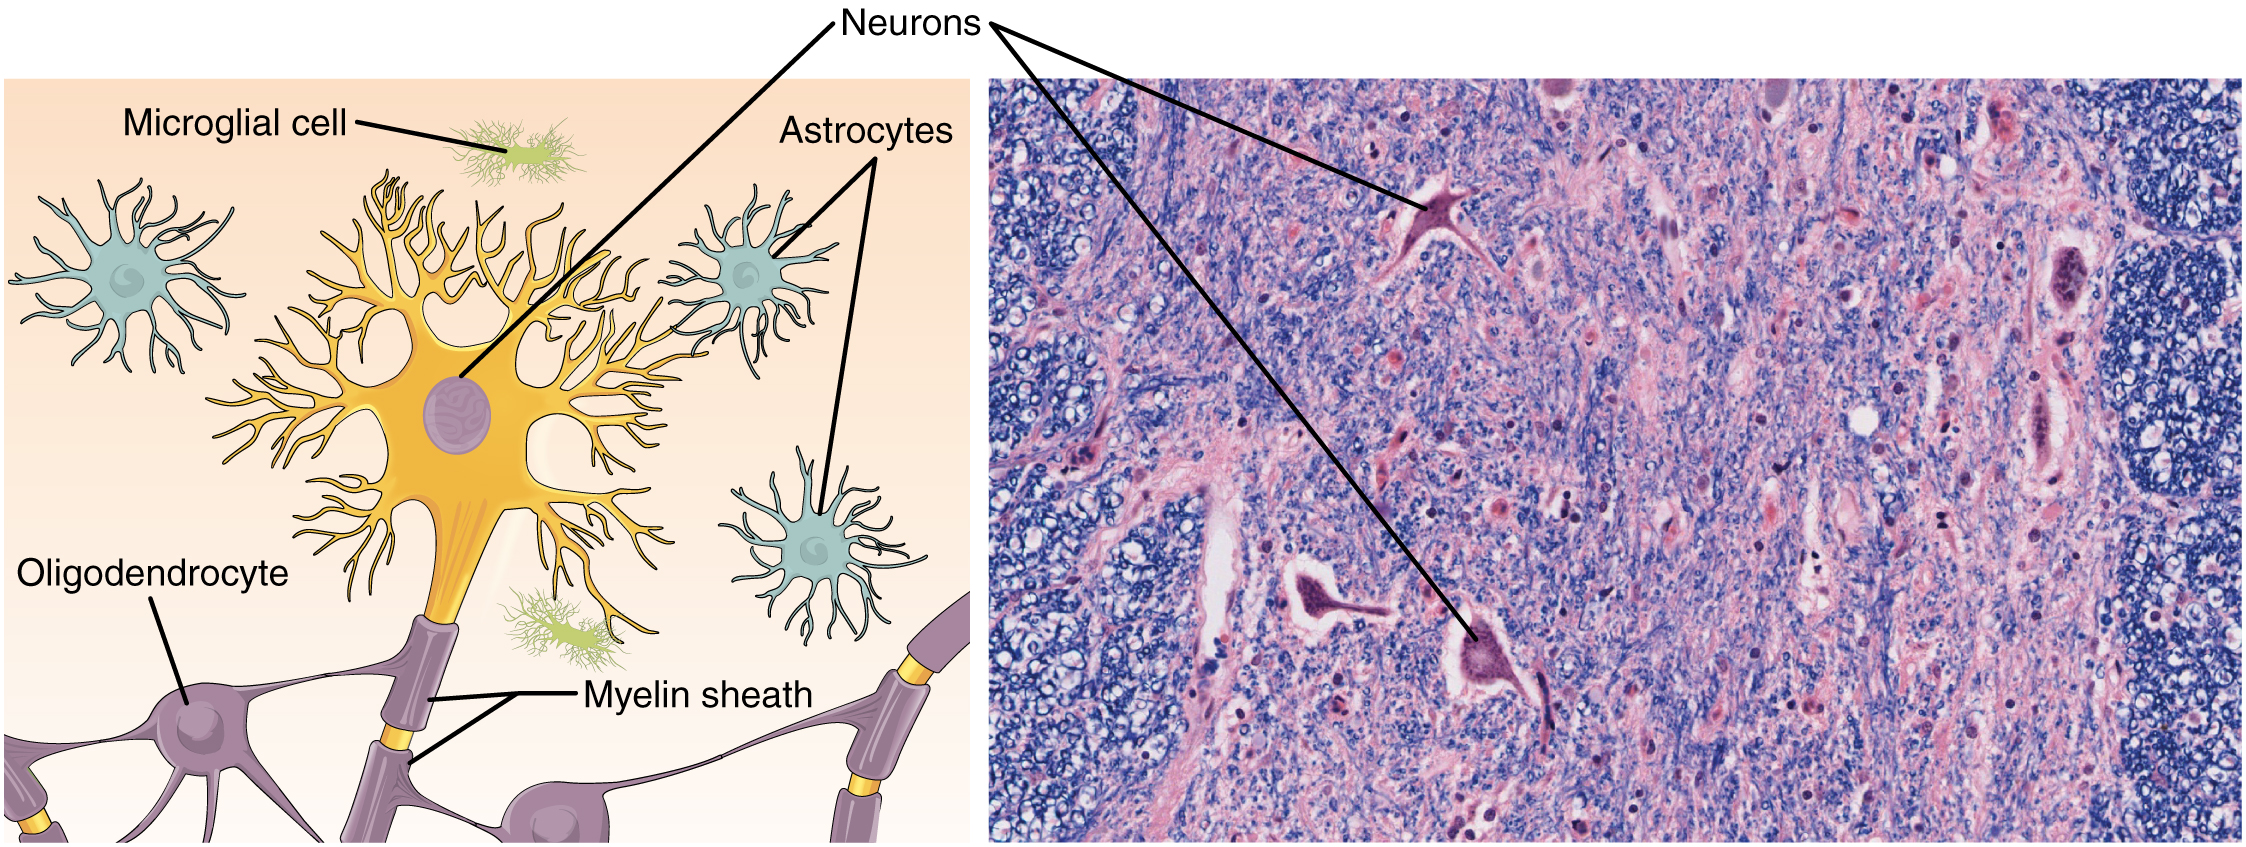  Nervous Tissue drawing with neurons and corresponding micrograph